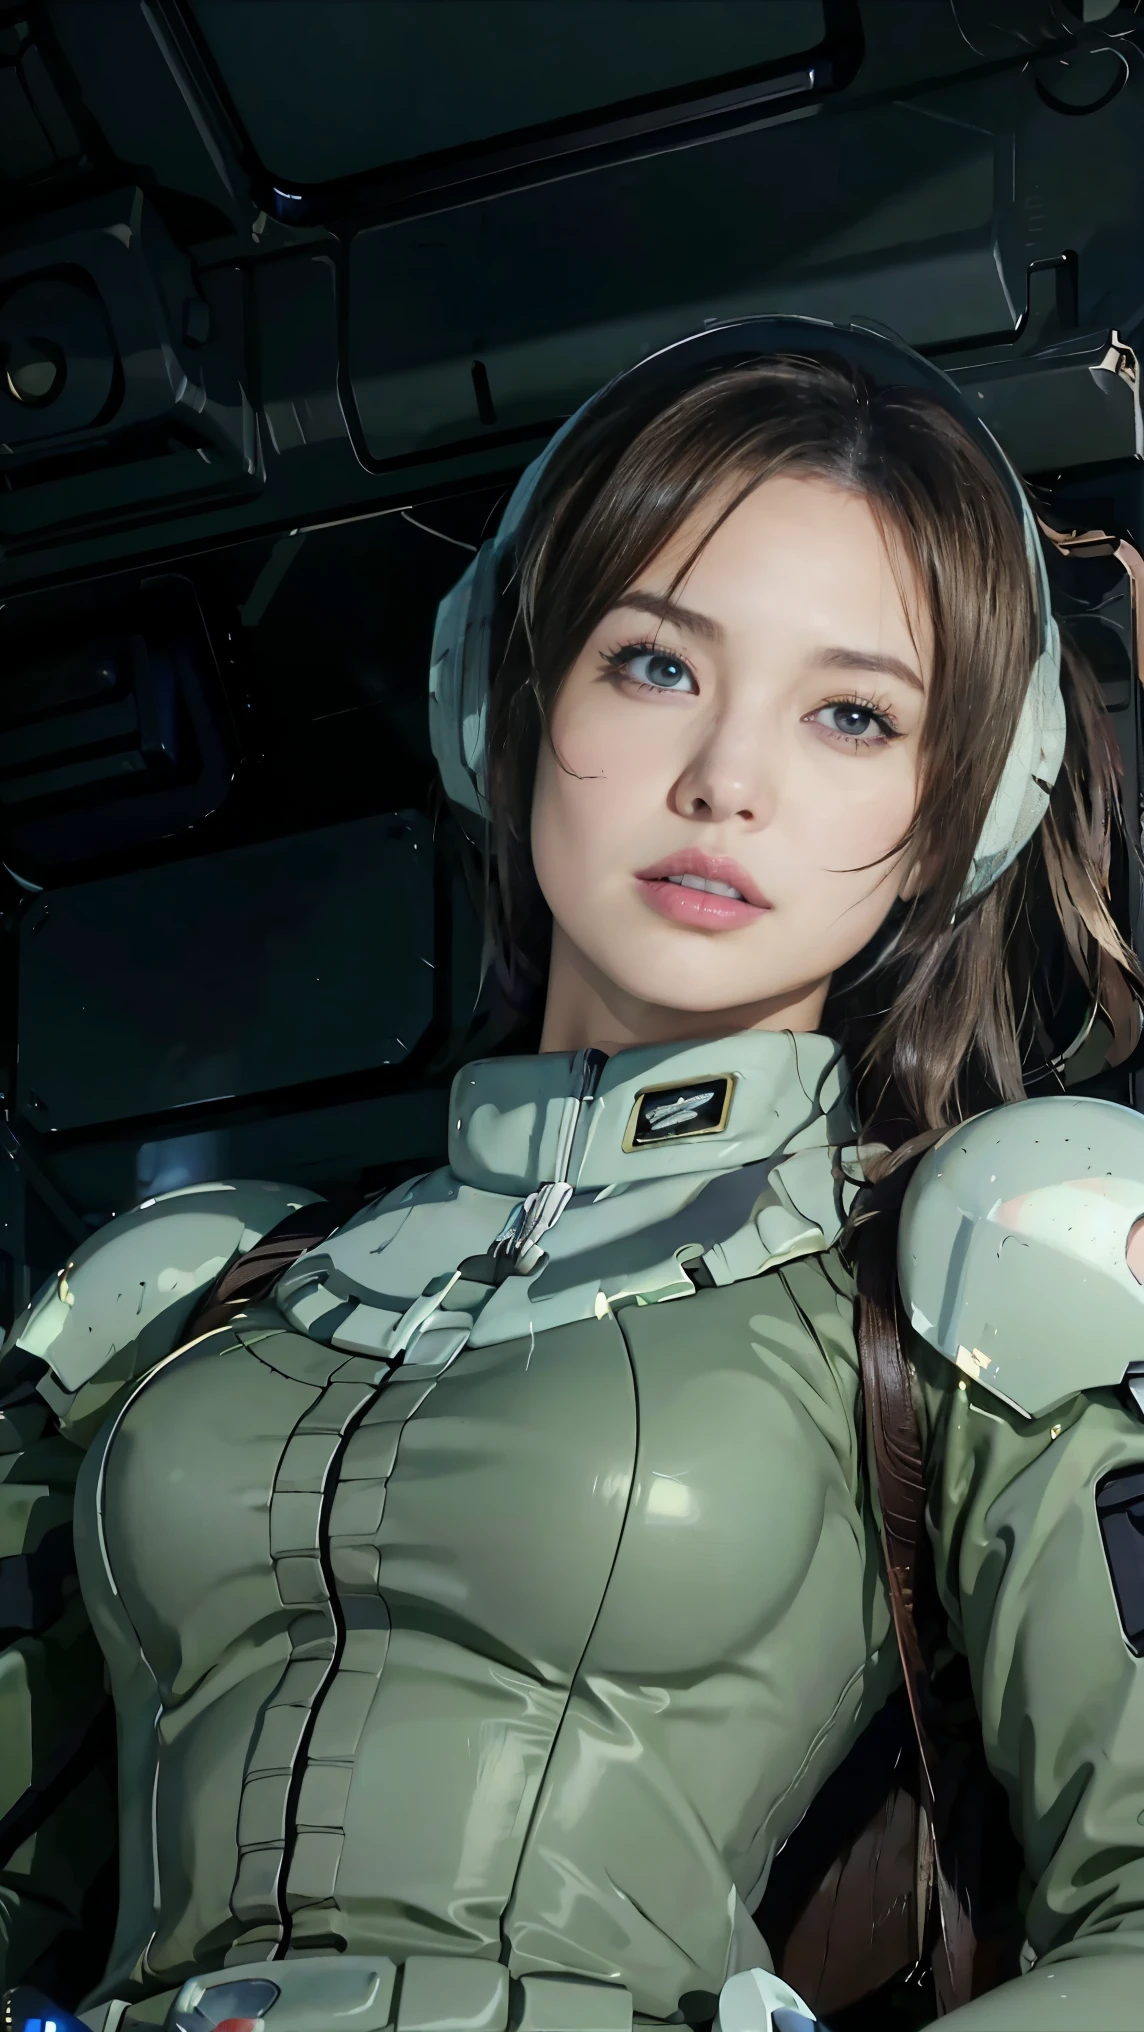 (((masterpiece,highest quality,In 8K,super detailed,High resolution,anime style,Absolutely))),Zeon female pilot sitting in the cockpit,(solo:1.5),(Angelina jolie:1.5),(((The background is the cockpit of a dark mobile suit.:1.5))),((blur background:1.5)),(Wearing a pilot suit:1.5),((Wearing a full-face helmet:1.5)),(Beautiful woman:1.5),(Detailed facial depiction:1.5),(big breasts:1.3),(wallpaper:1.5),(from below:1.5)